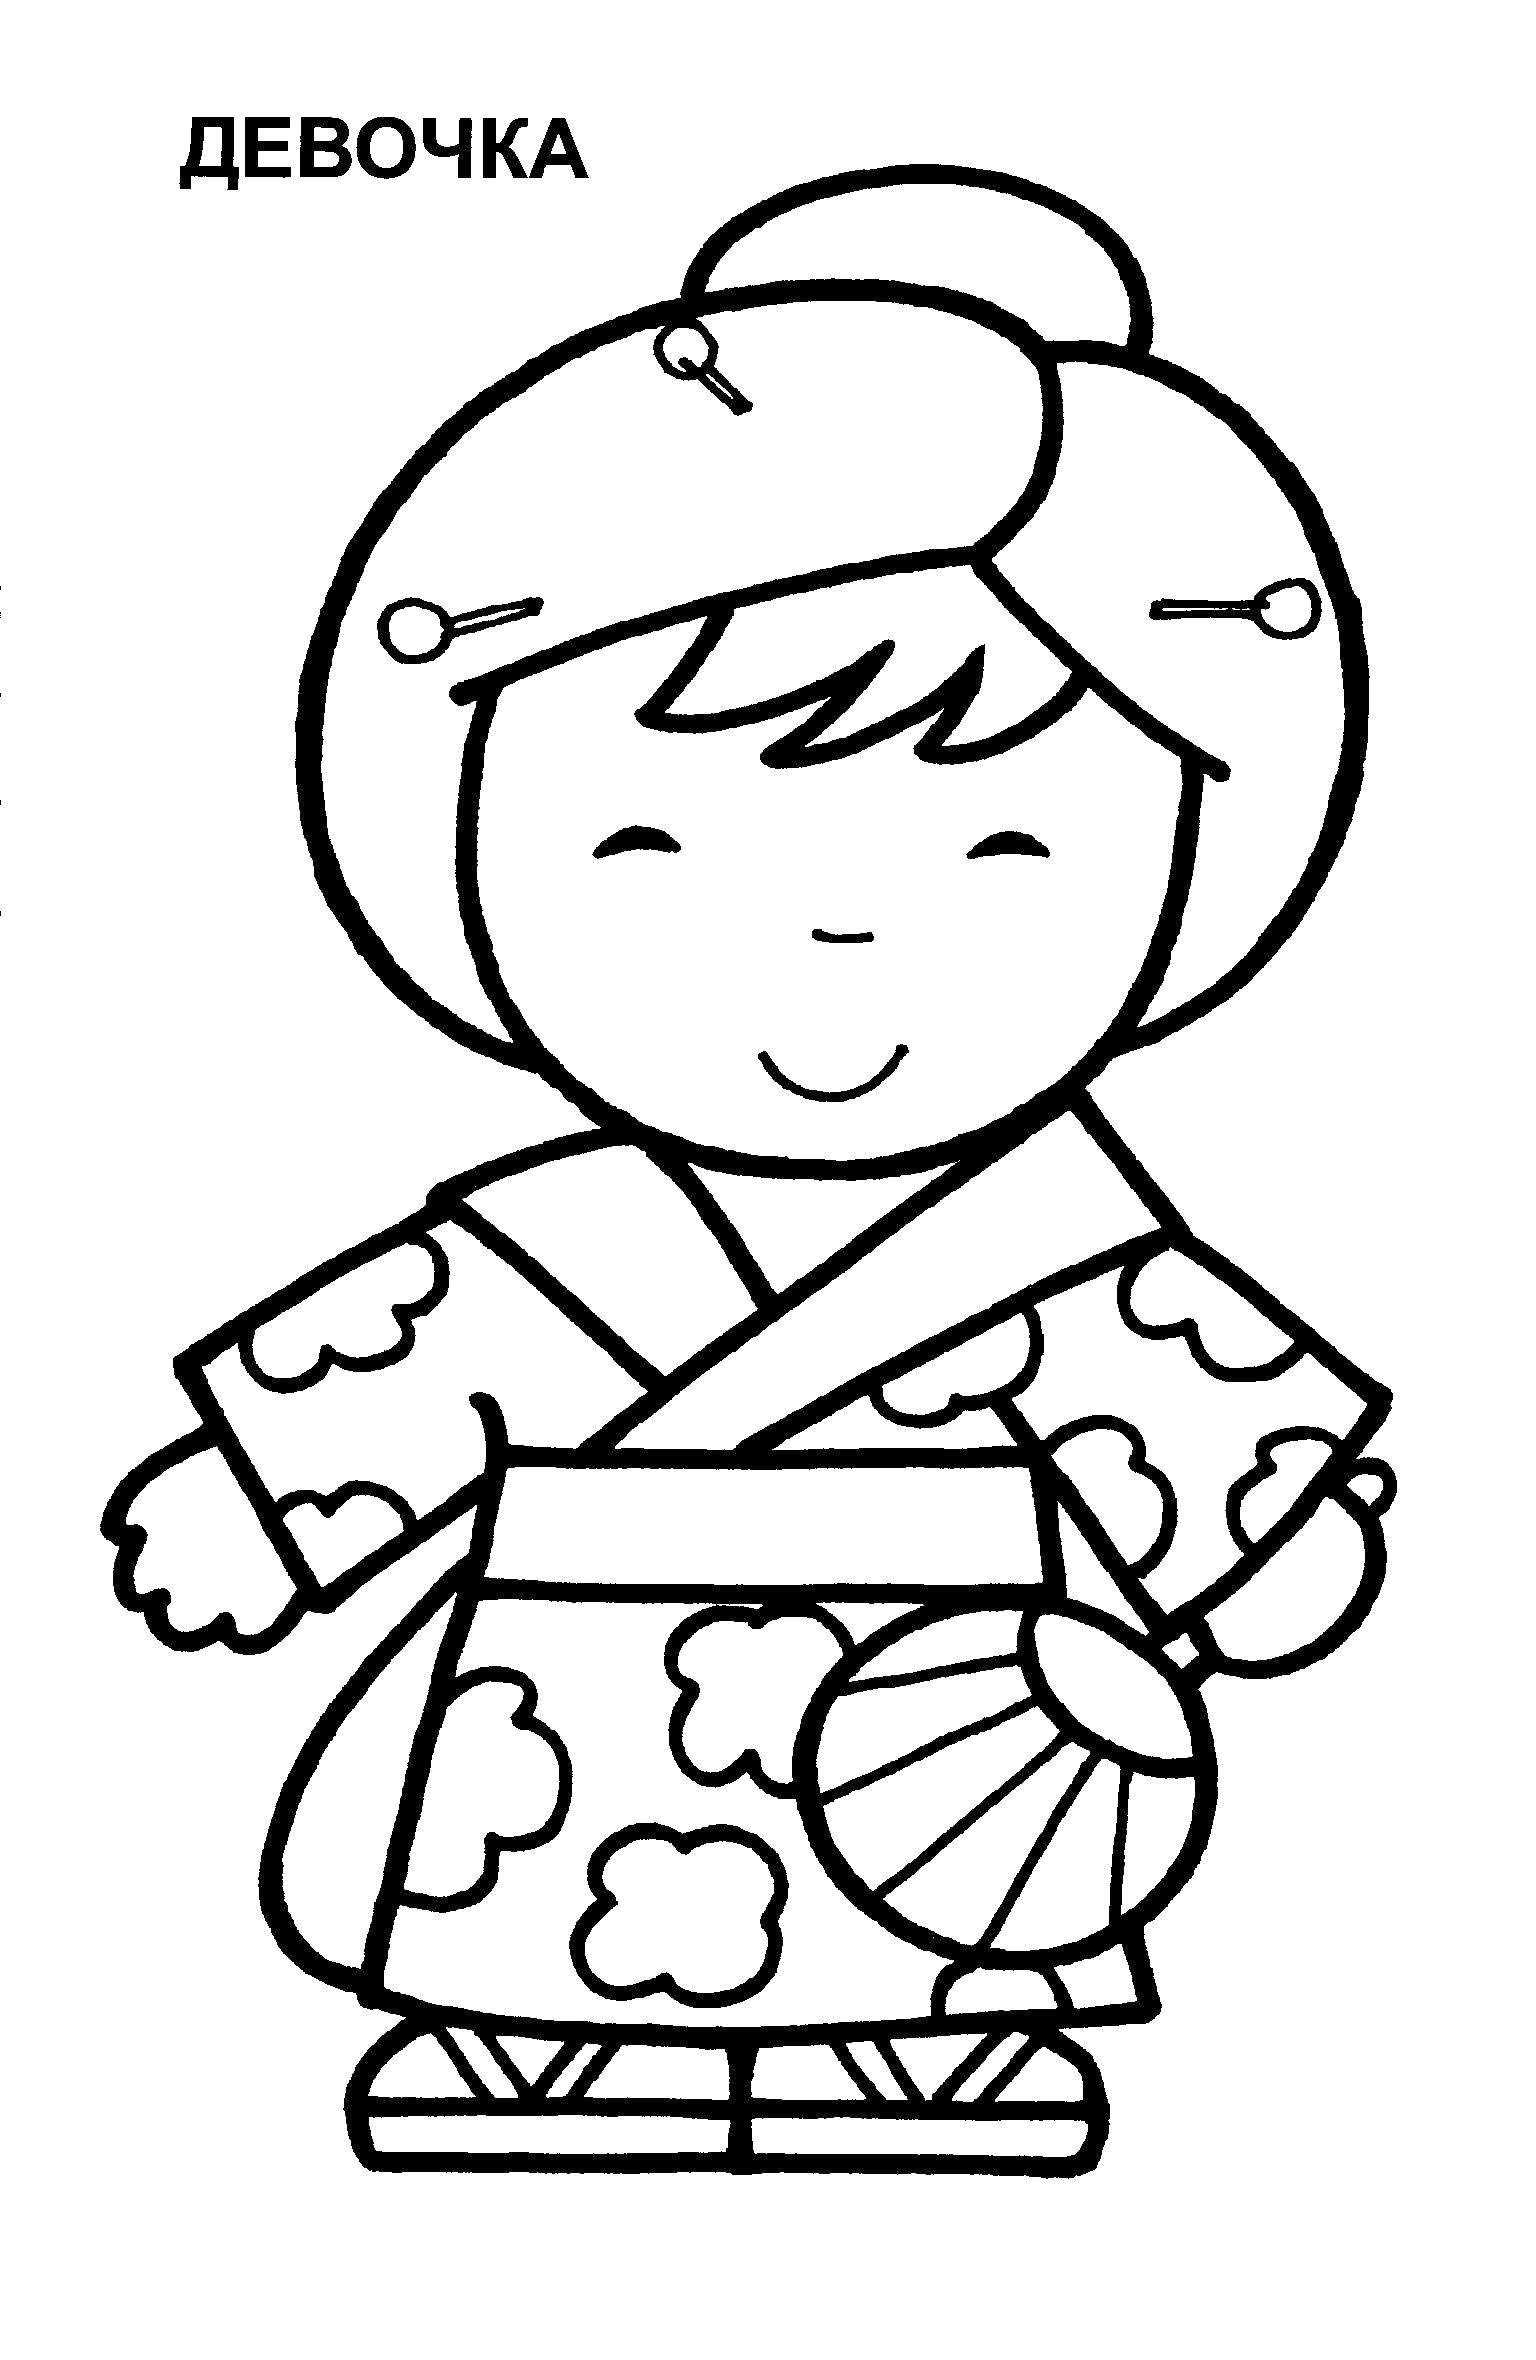 Coloring Girl in a kimono. Category coloring pages for girls. Tags:  girl , kimono.